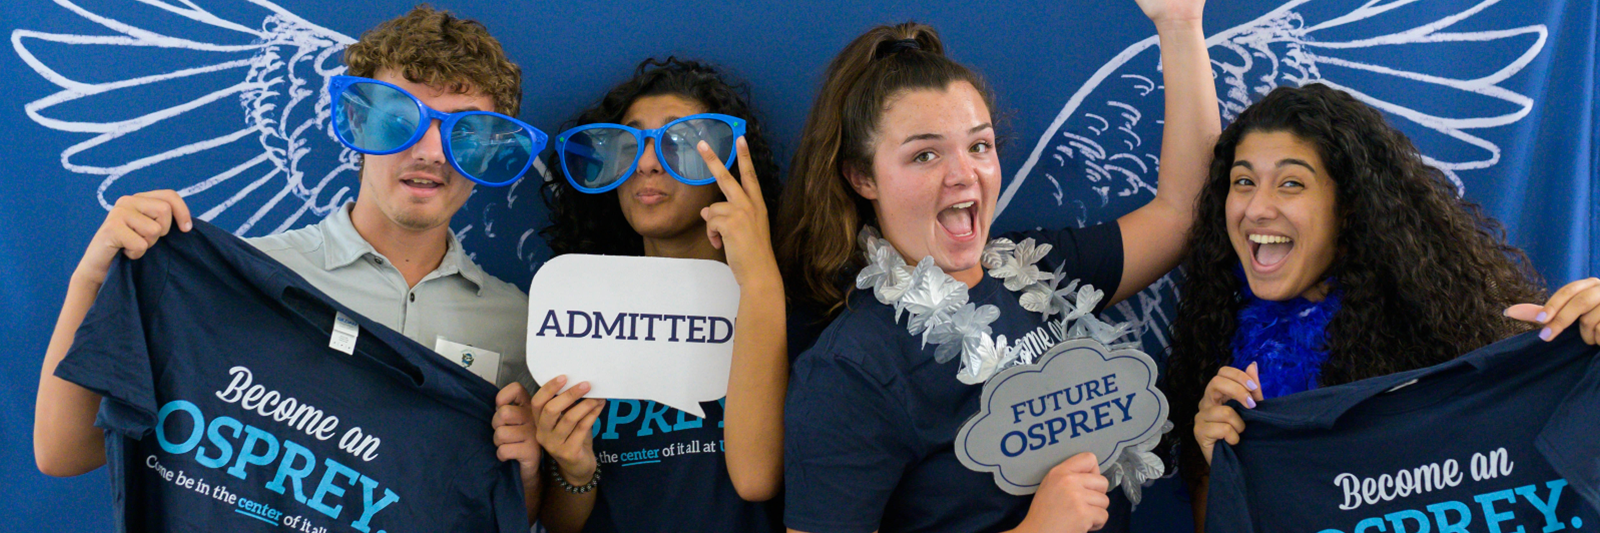 Four new UNF students in a photo booth holding UNF signs and striking fun poses